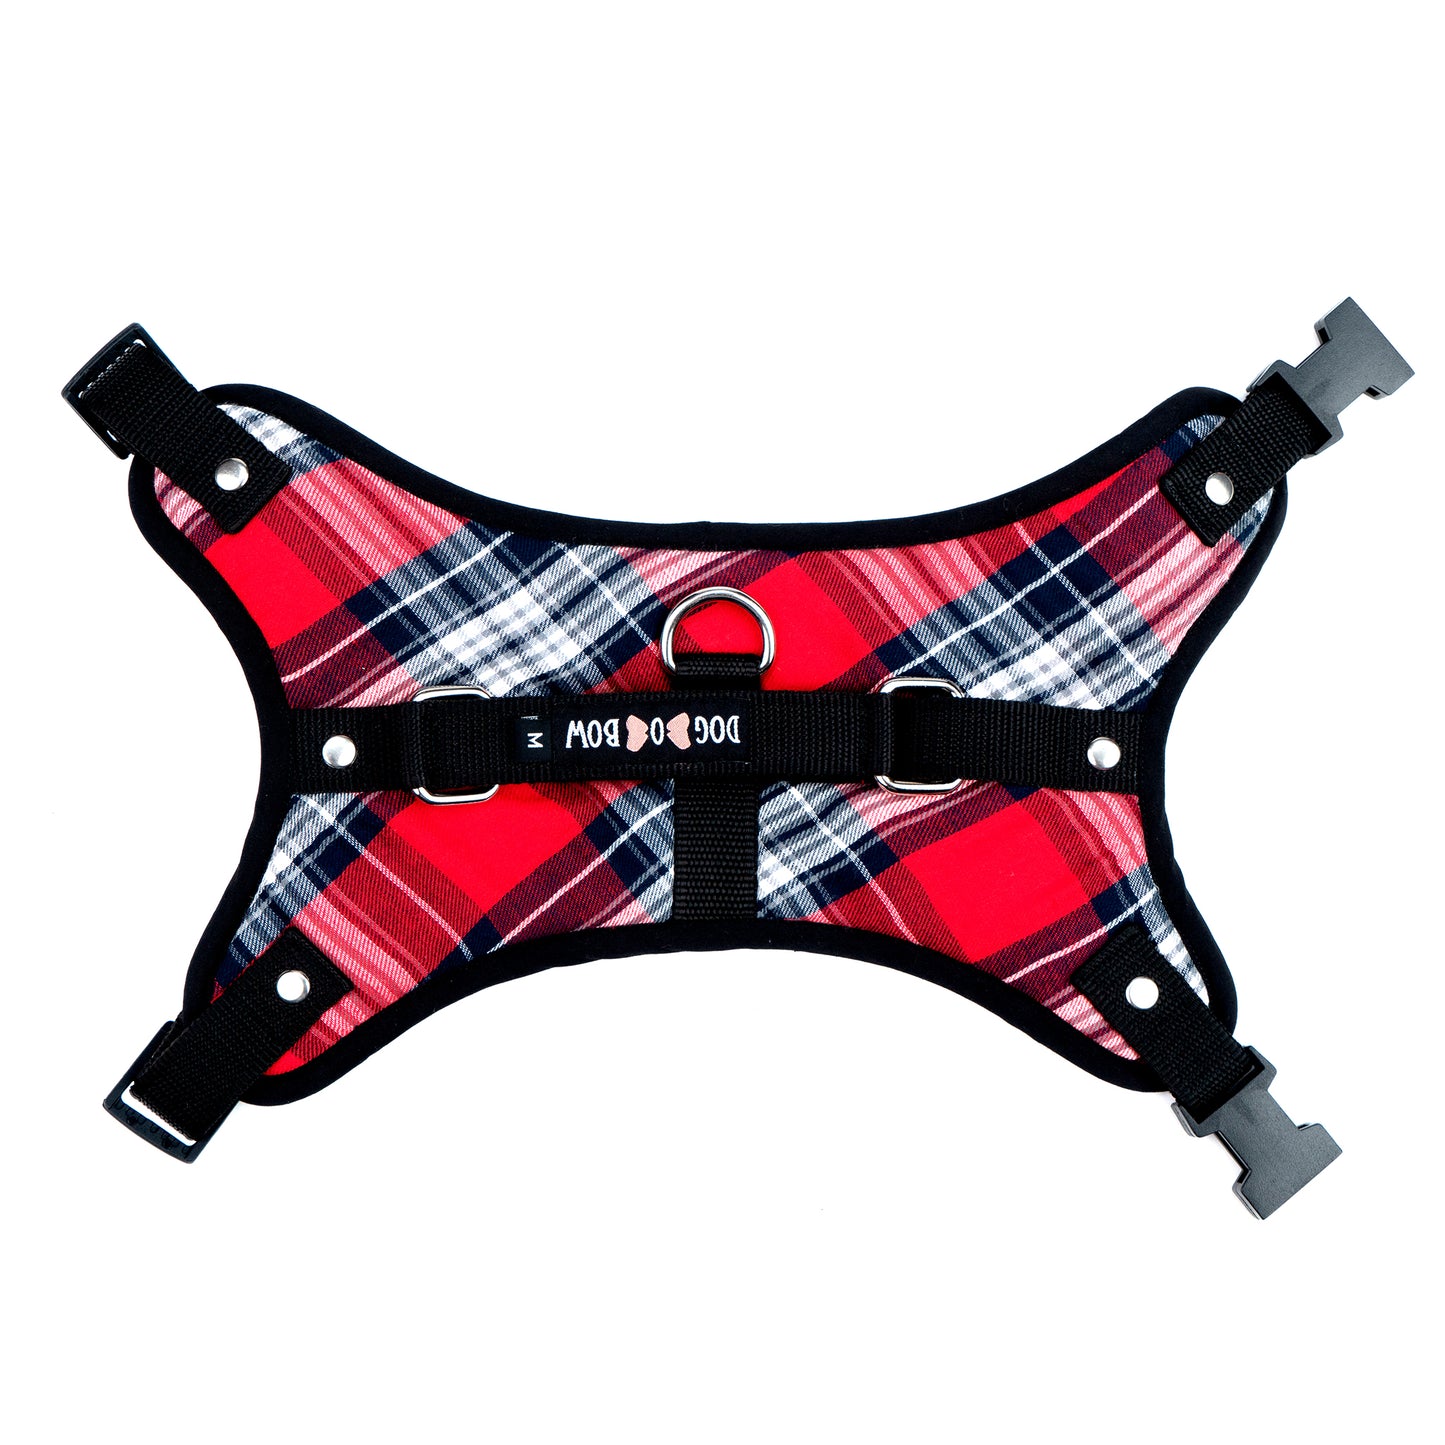 The Poker Check Overhead Harness